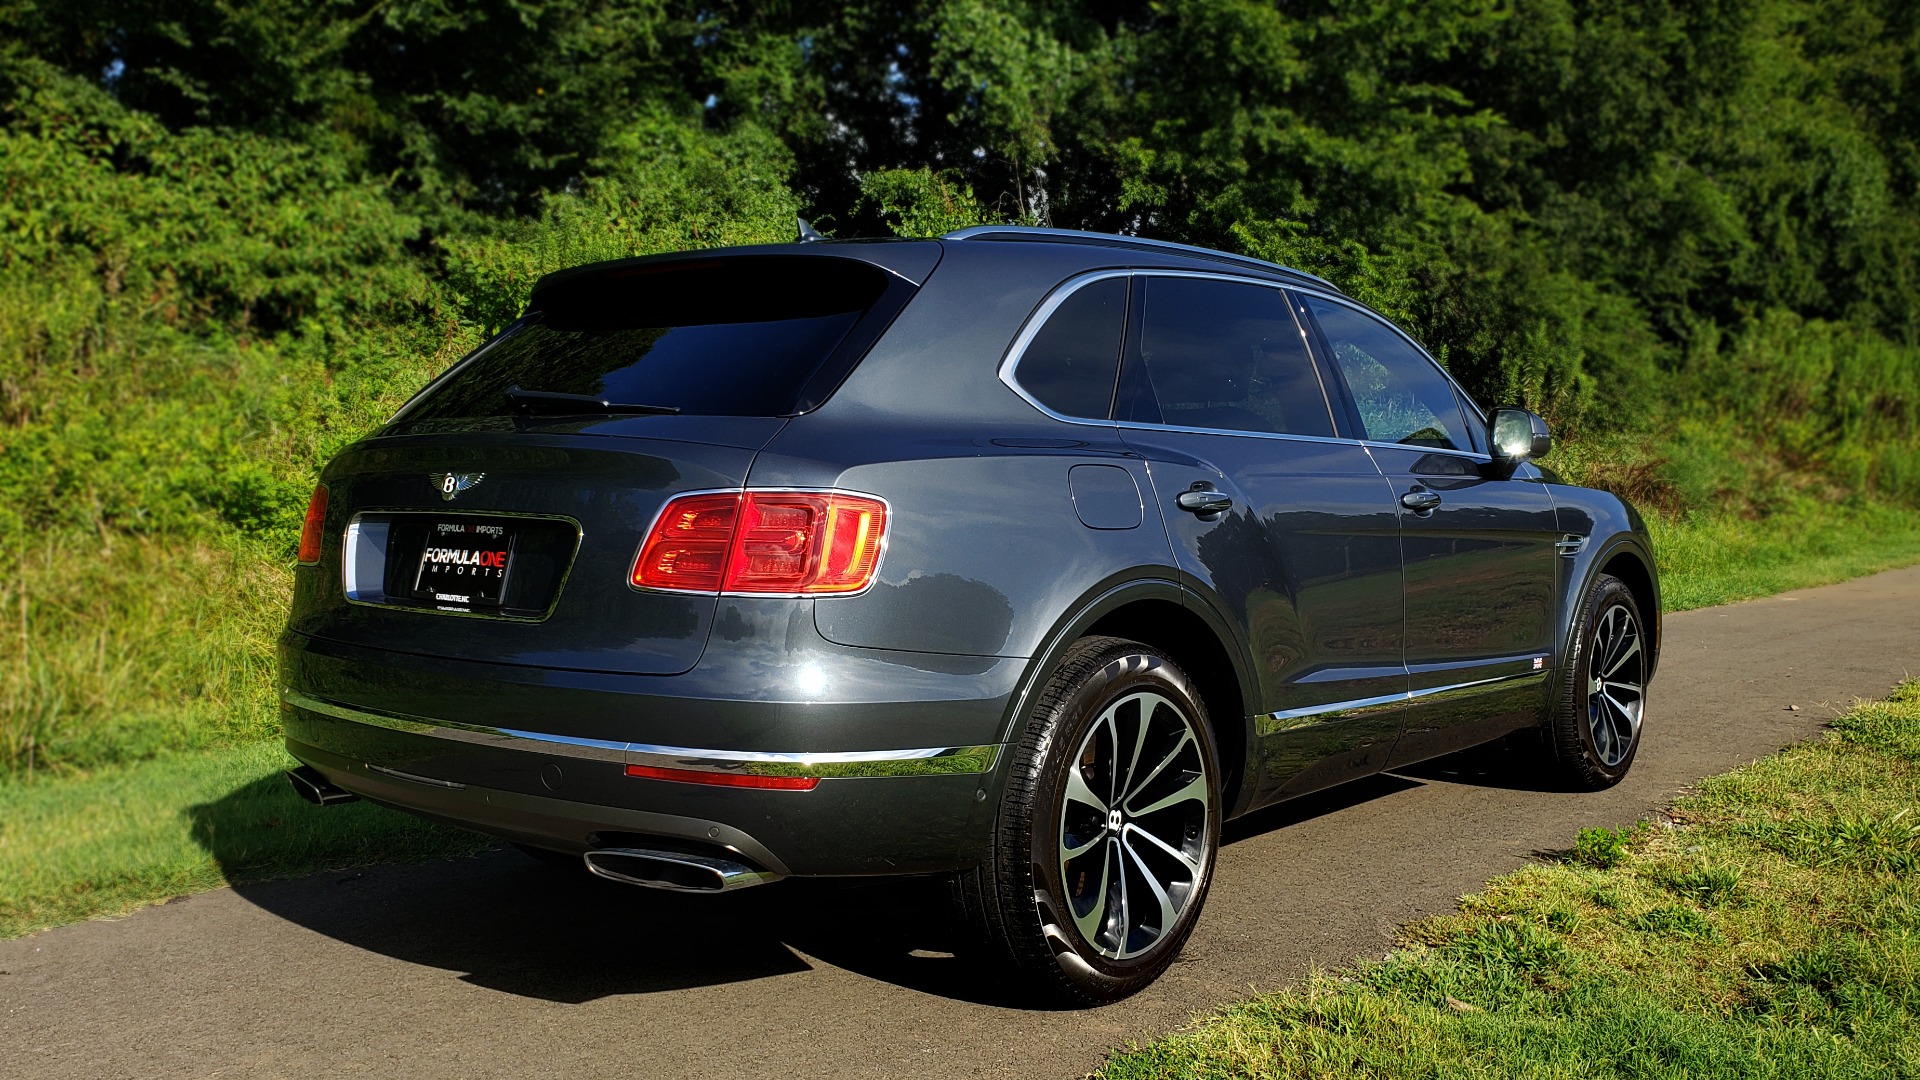 Used 2017 Bentley BENTAYGA W12 600HP / NAV / HTD SEATS / PANO-ROOF / REARVIEW / 21IN WHEELS for sale Sold at Formula Imports in Charlotte NC 28227 19